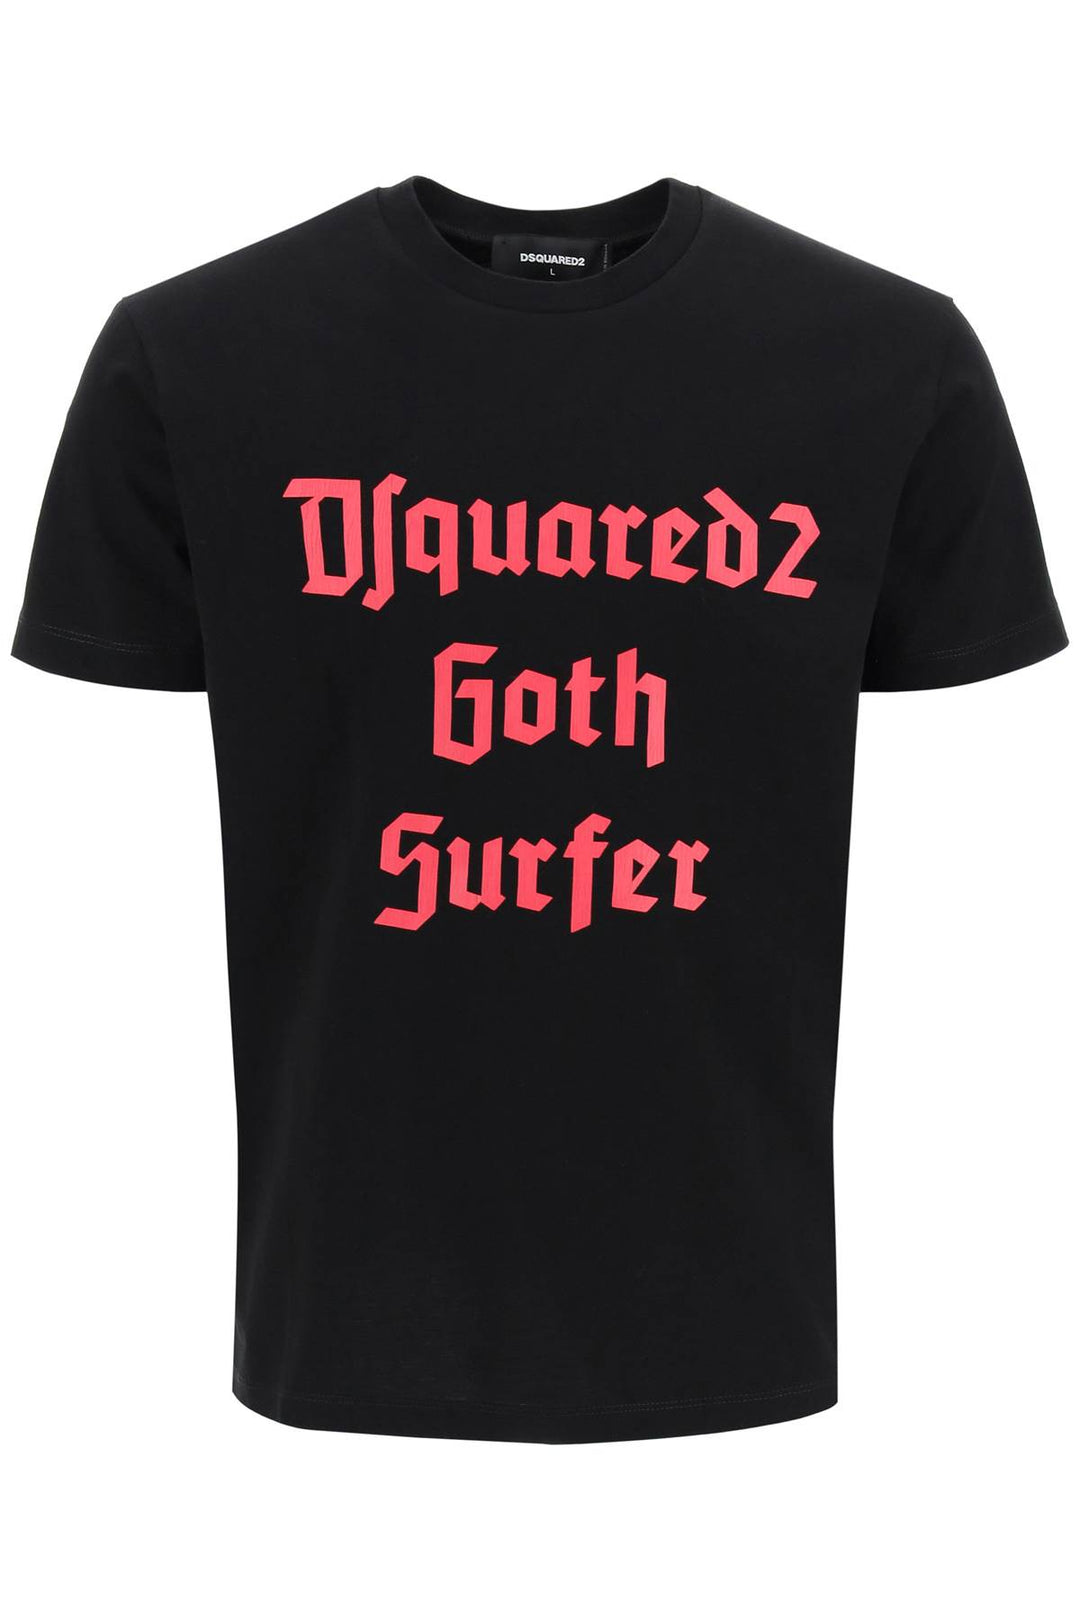 T Shirt 'D2 Goth Surfer' - Dsquared2 - Uomo